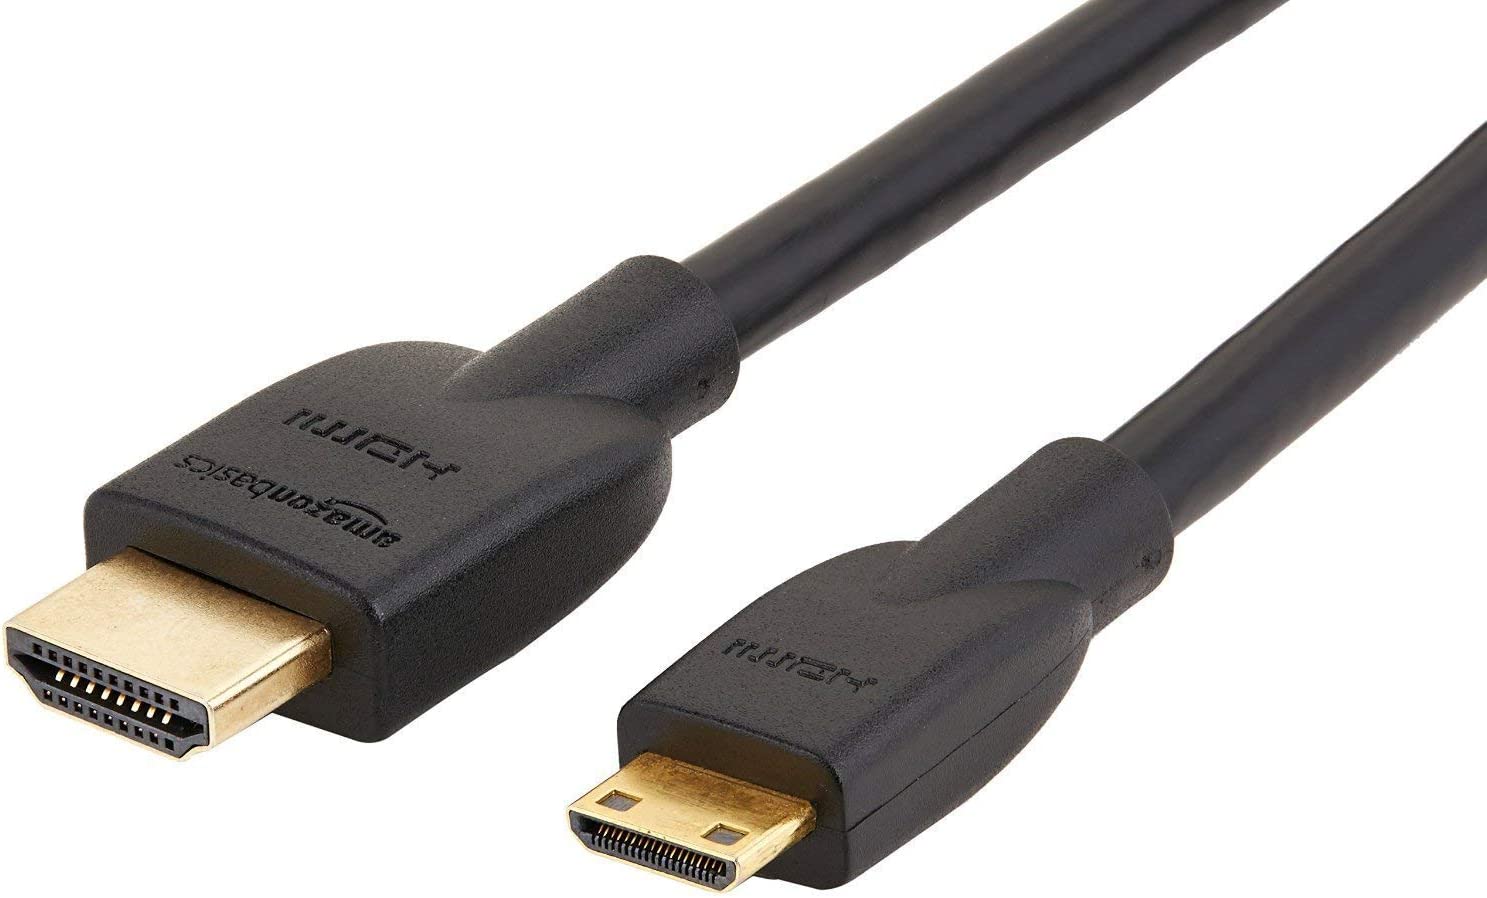 Amazon Basics High-Speed Mini-HDMI to HDMI TV Adapter Cable RRP 8.99 CLEARANCE XL 4.99